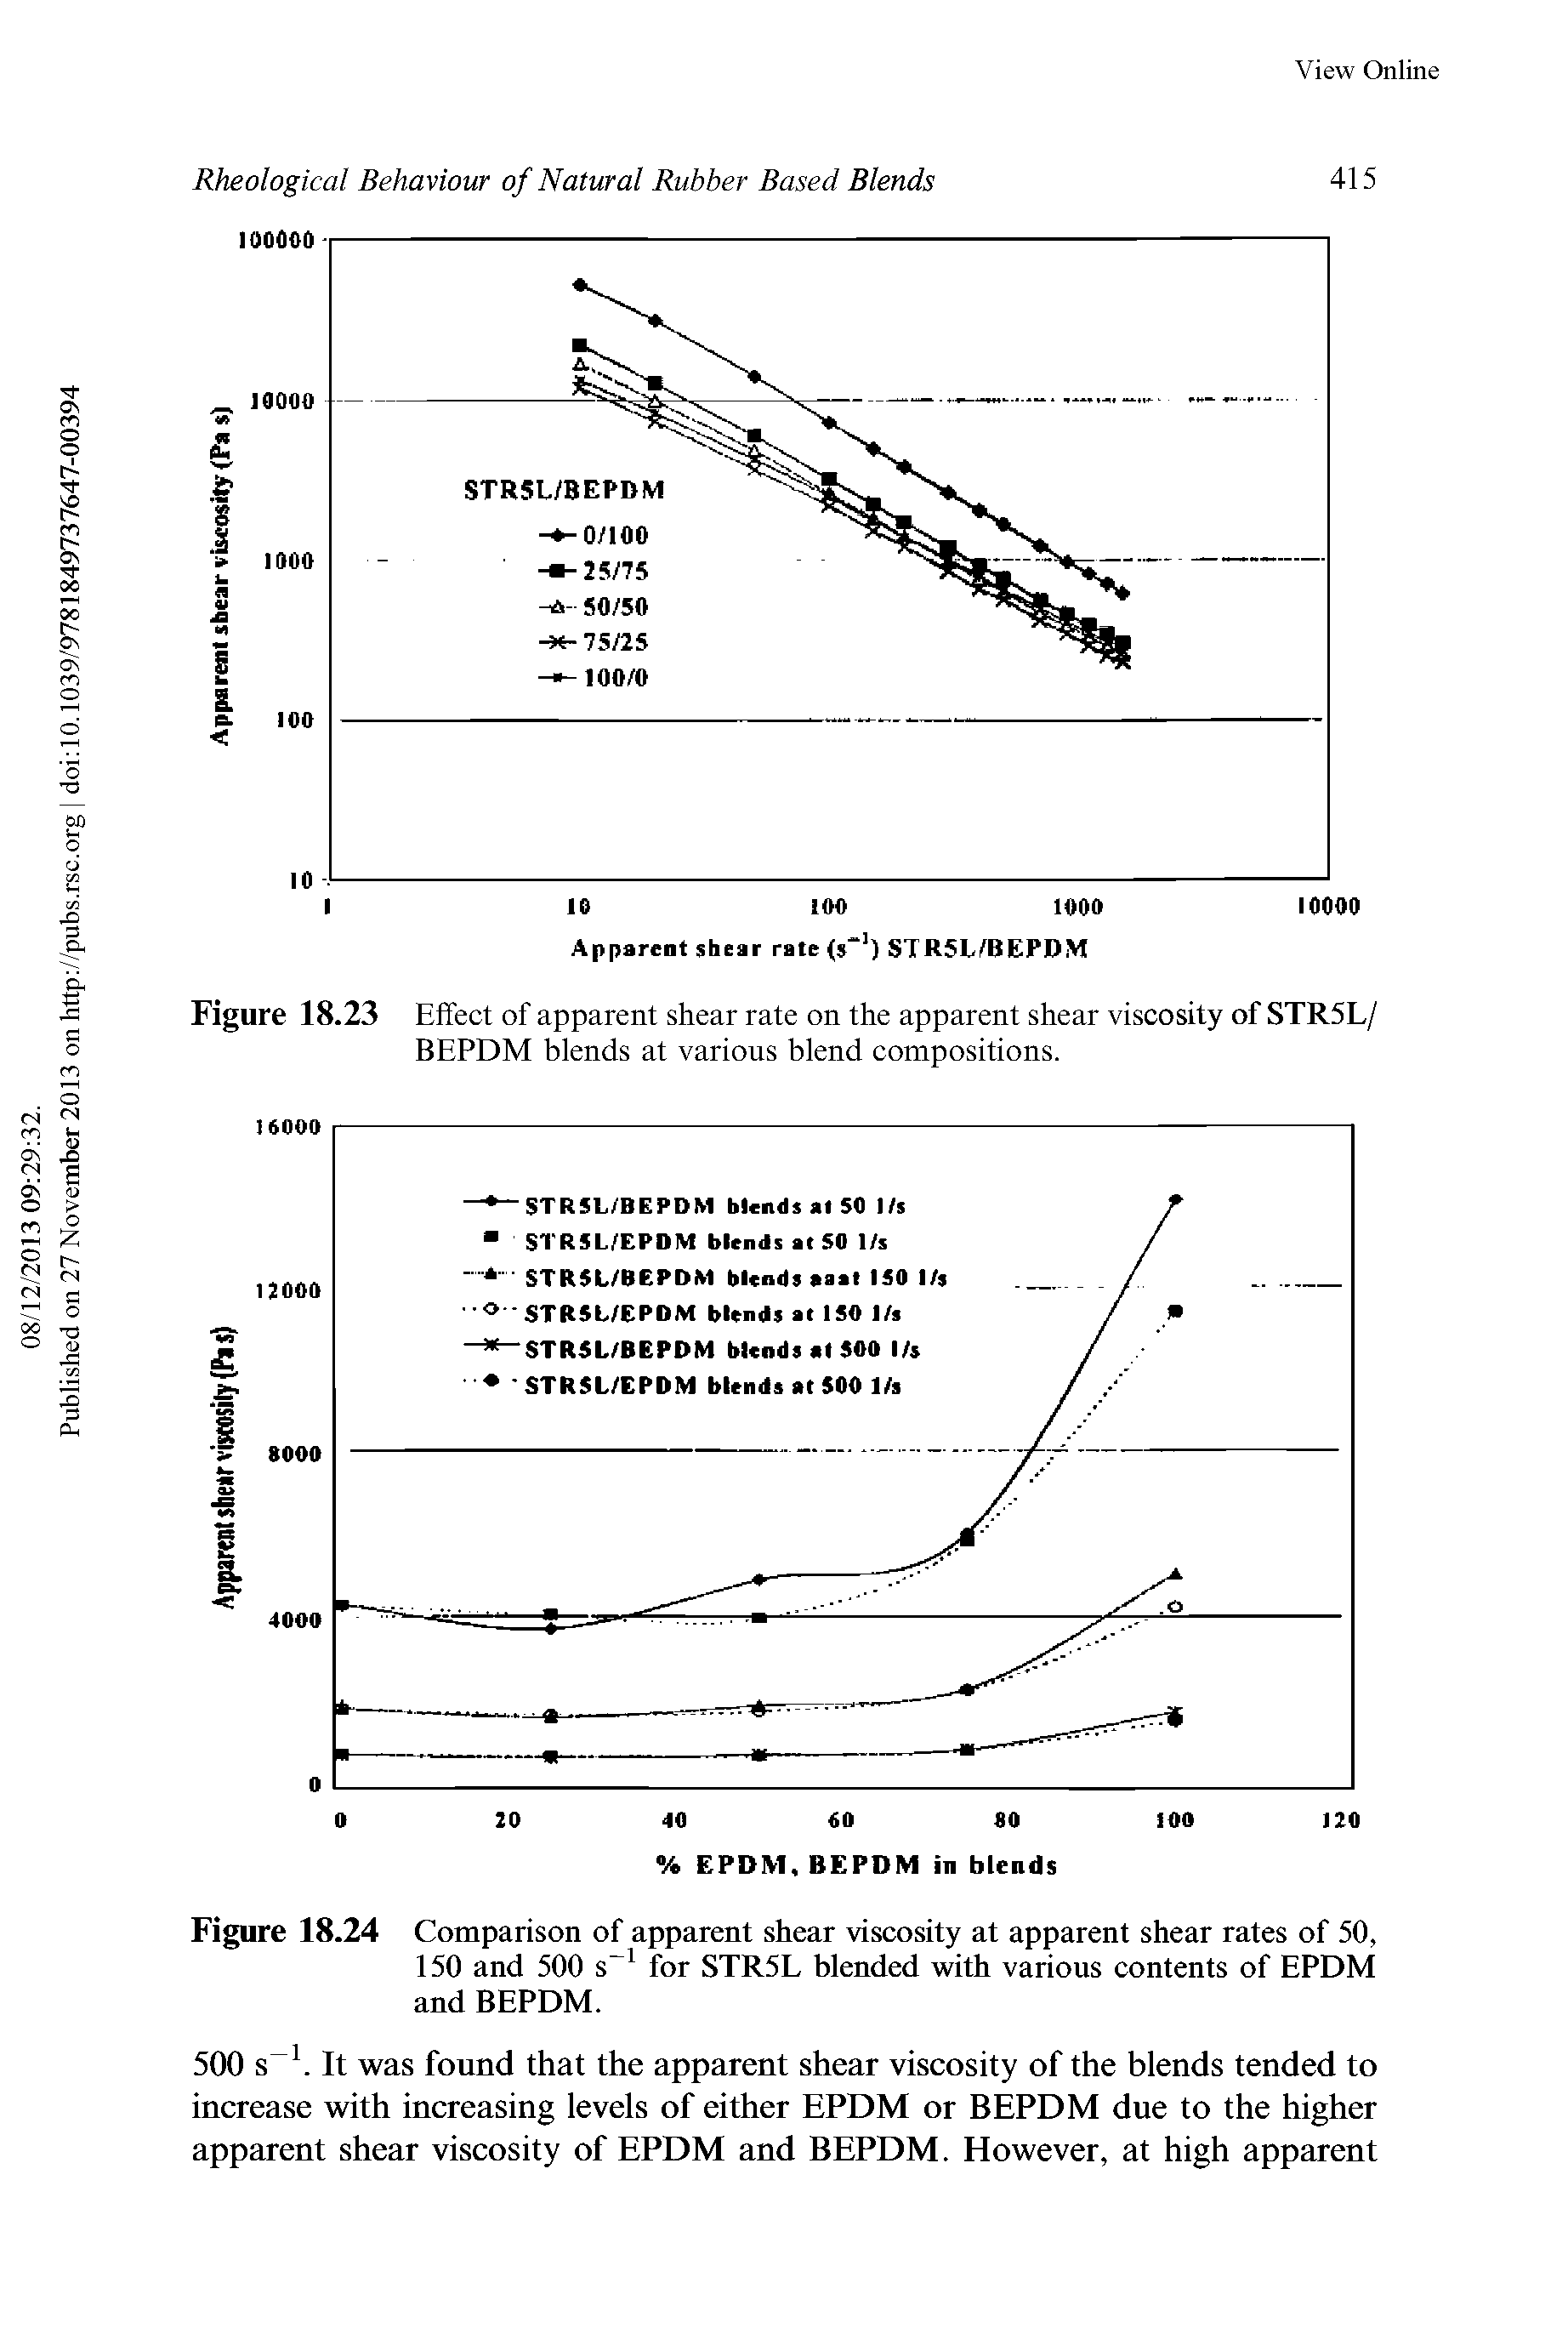 Figure 18.24 Comparison of apparent shear viscosity at apparent shear rates of 50, 150 and 500 s for STR5L blended with various contents of EPDM and BEPDM.